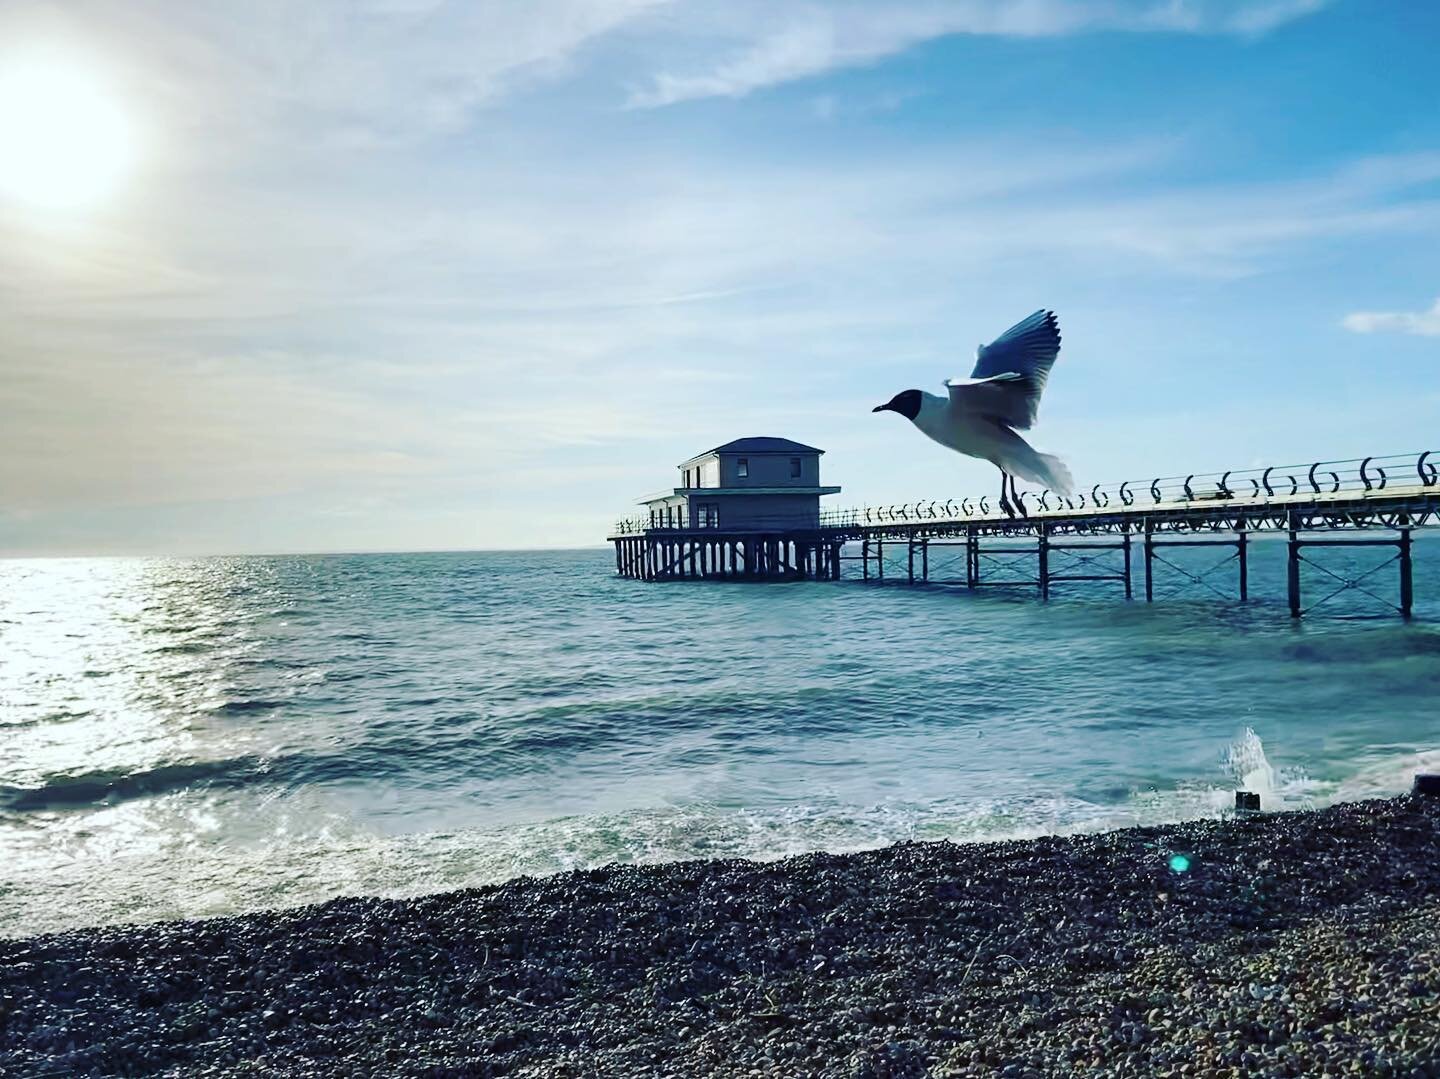 Giant bird spotted on Totland Pier 🦅 😮